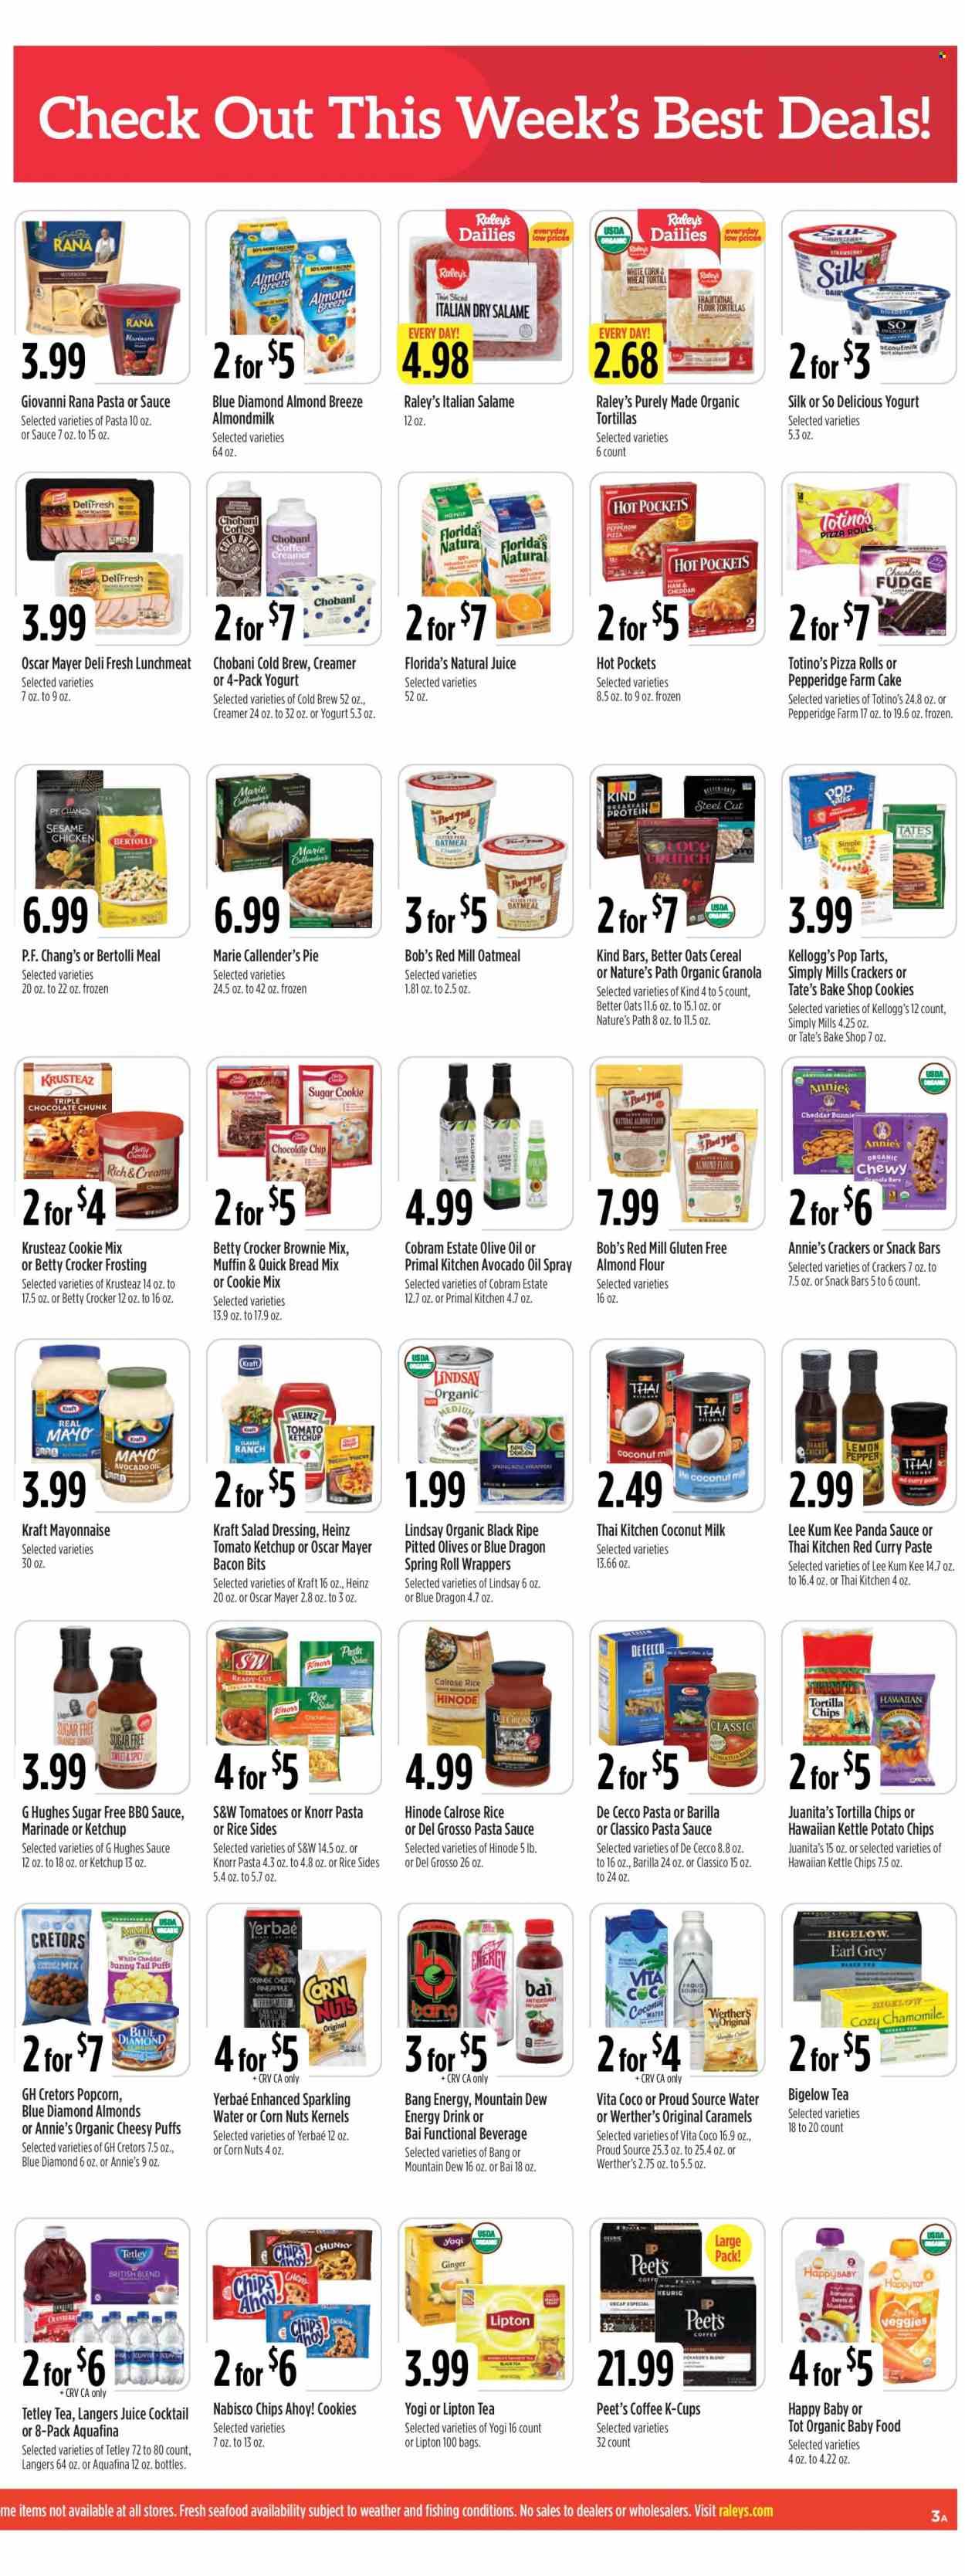 thumbnail - Raley's Flyer - 01/26/2022 - 02/01/2022 - Sales products - bread, cake, pie, pizza rolls, flour tortillas, puffs, muffin, brownie mix, corn, ginger, pineapple, oranges, seafood, hot pocket, pizza, pasta sauce, Knorr, Barilla, Giovanni Rana, Marie Callender's, Annie's, Kraft®, Bertolli, Rana, red curry, ham, bacon bits, Oscar Mayer, pepperoni, lunch meat, yoghurt, Chobani, almond milk, Silk, Almond Breeze, creamer, mayonnaise, fudge, crackers, Kellogg's, Pop-Tarts, Chips Ahoy!, snack bar, Florida's Natural, tortilla chips, potato chips, popcorn, frosting, oatmeal, almond flour, coconut milk, Heinz, olives, cereals, granola bar, rice, BBQ sauce, curry paste, salad dressing, ketchup, dressing, marinade, Lee Kum Kee, Classico, avocado oil, olive oil, Blue Diamond, Mountain Dew, juice, energy drink, Lipton, Bai, Aquafina, sparkling water, tea, coffee capsules, K-Cups, Keurig, organic baby food. Page 3.